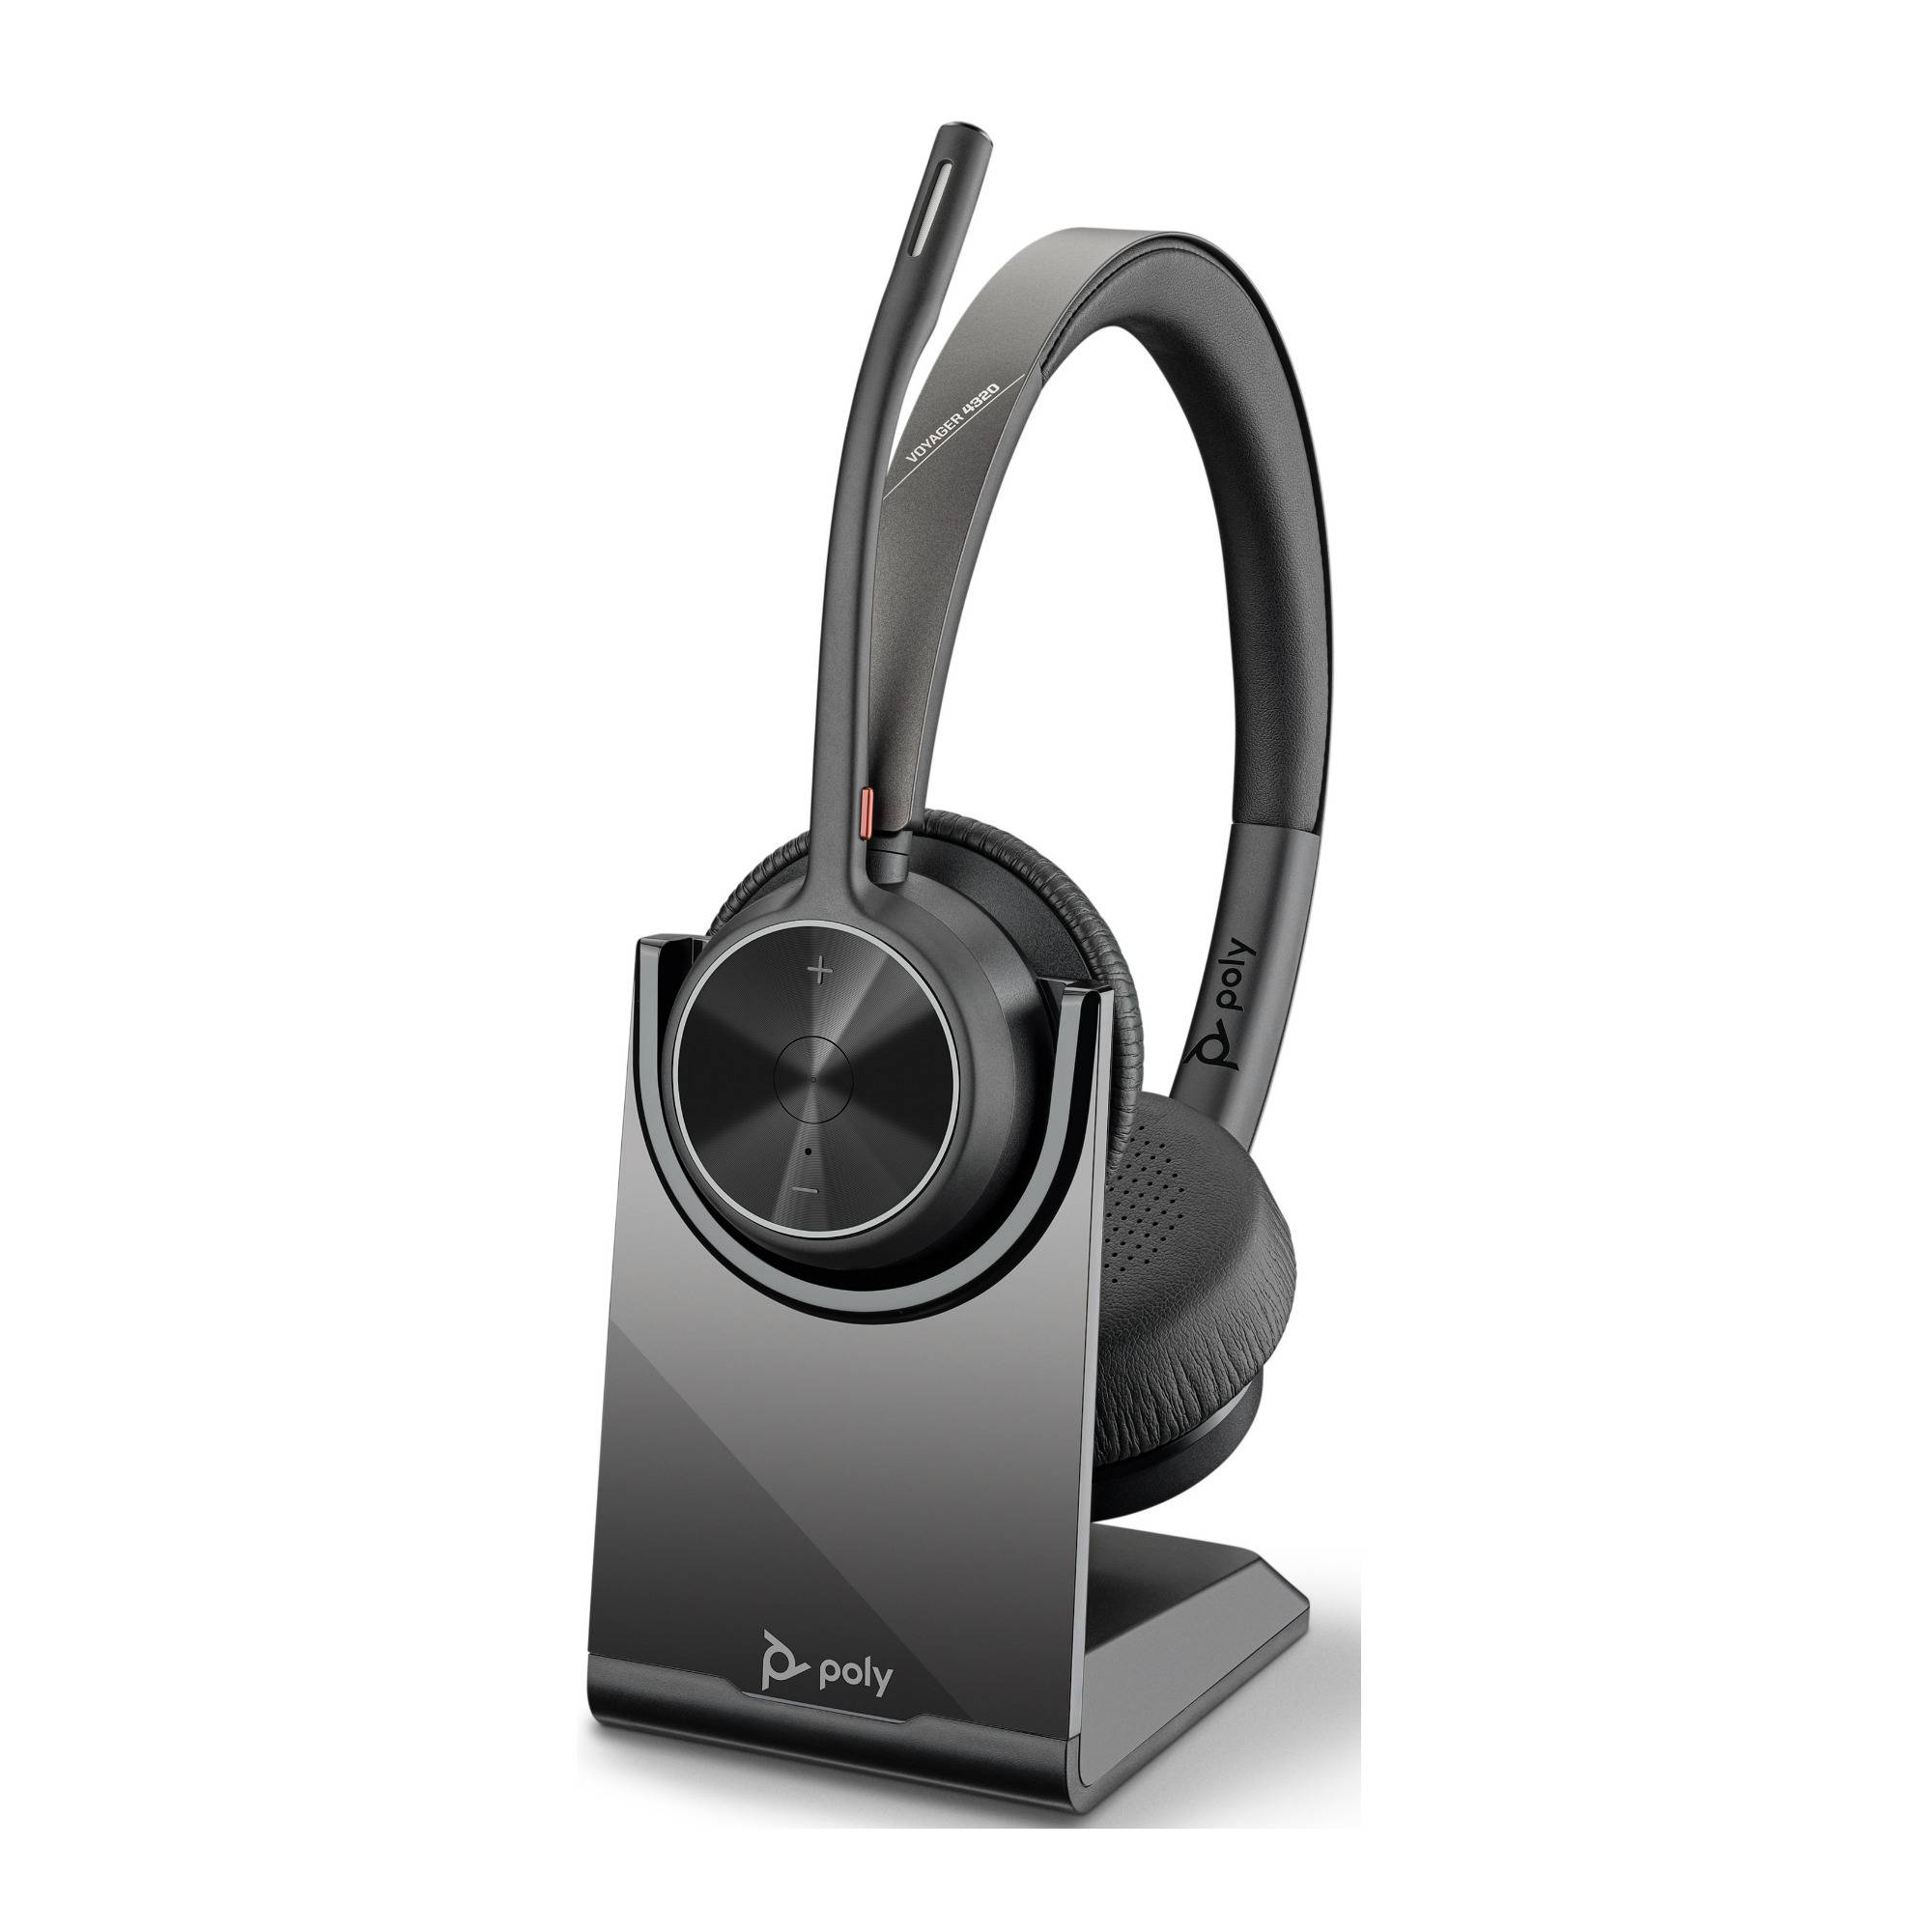 Poly Plantronics Voyager 4320 UC Wireless Headset and Charge Stand Teams